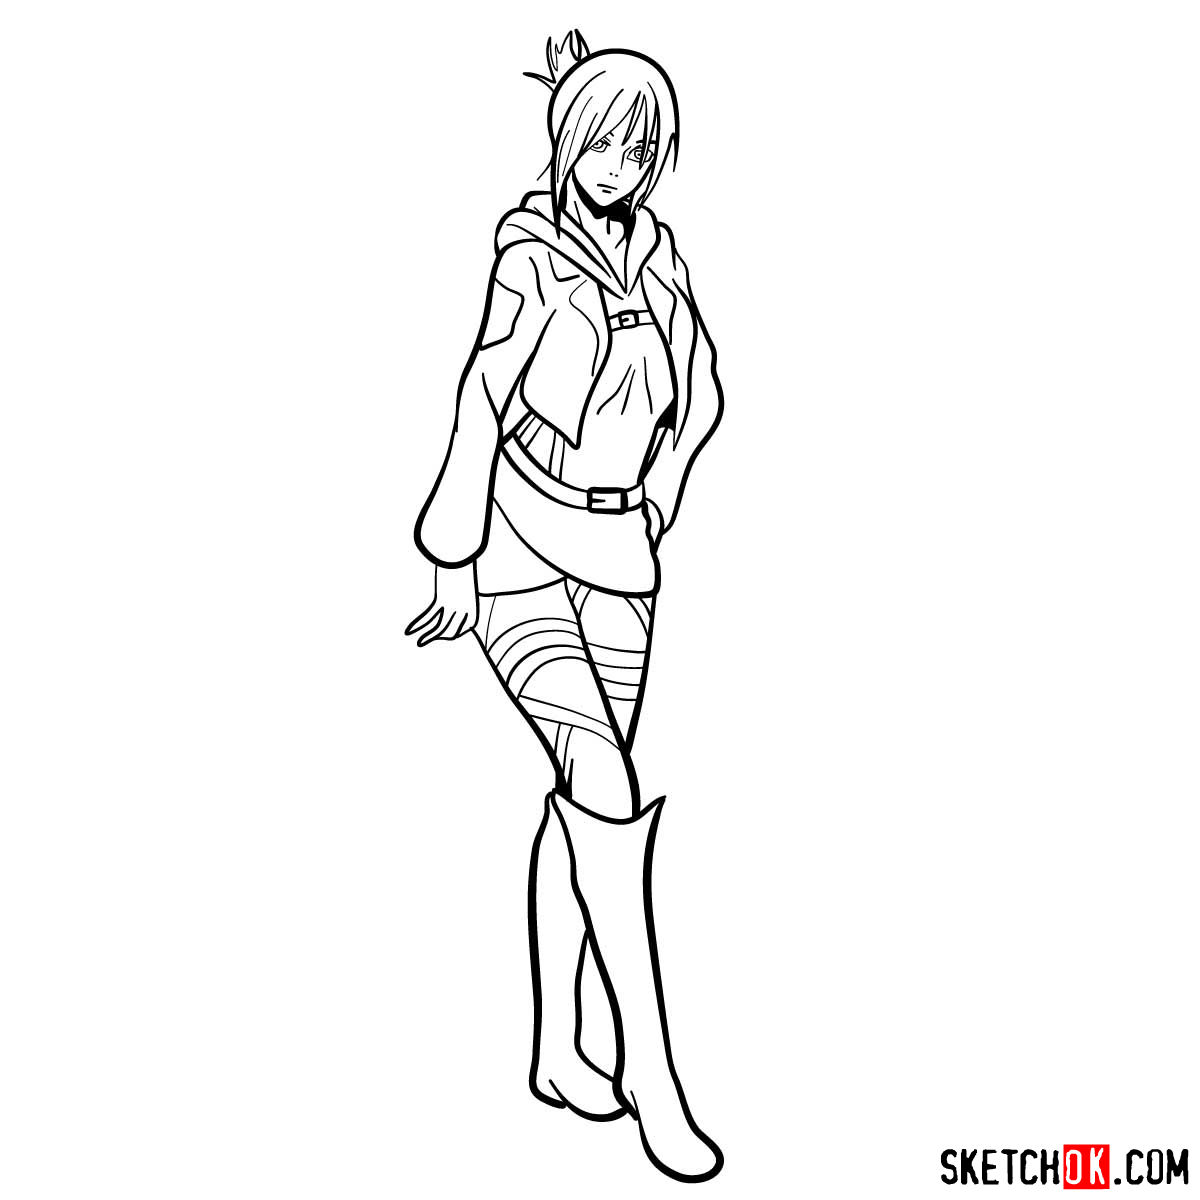 How to draw Annie Leonhardt | Attack on Titan - Sketchok easy drawing guides